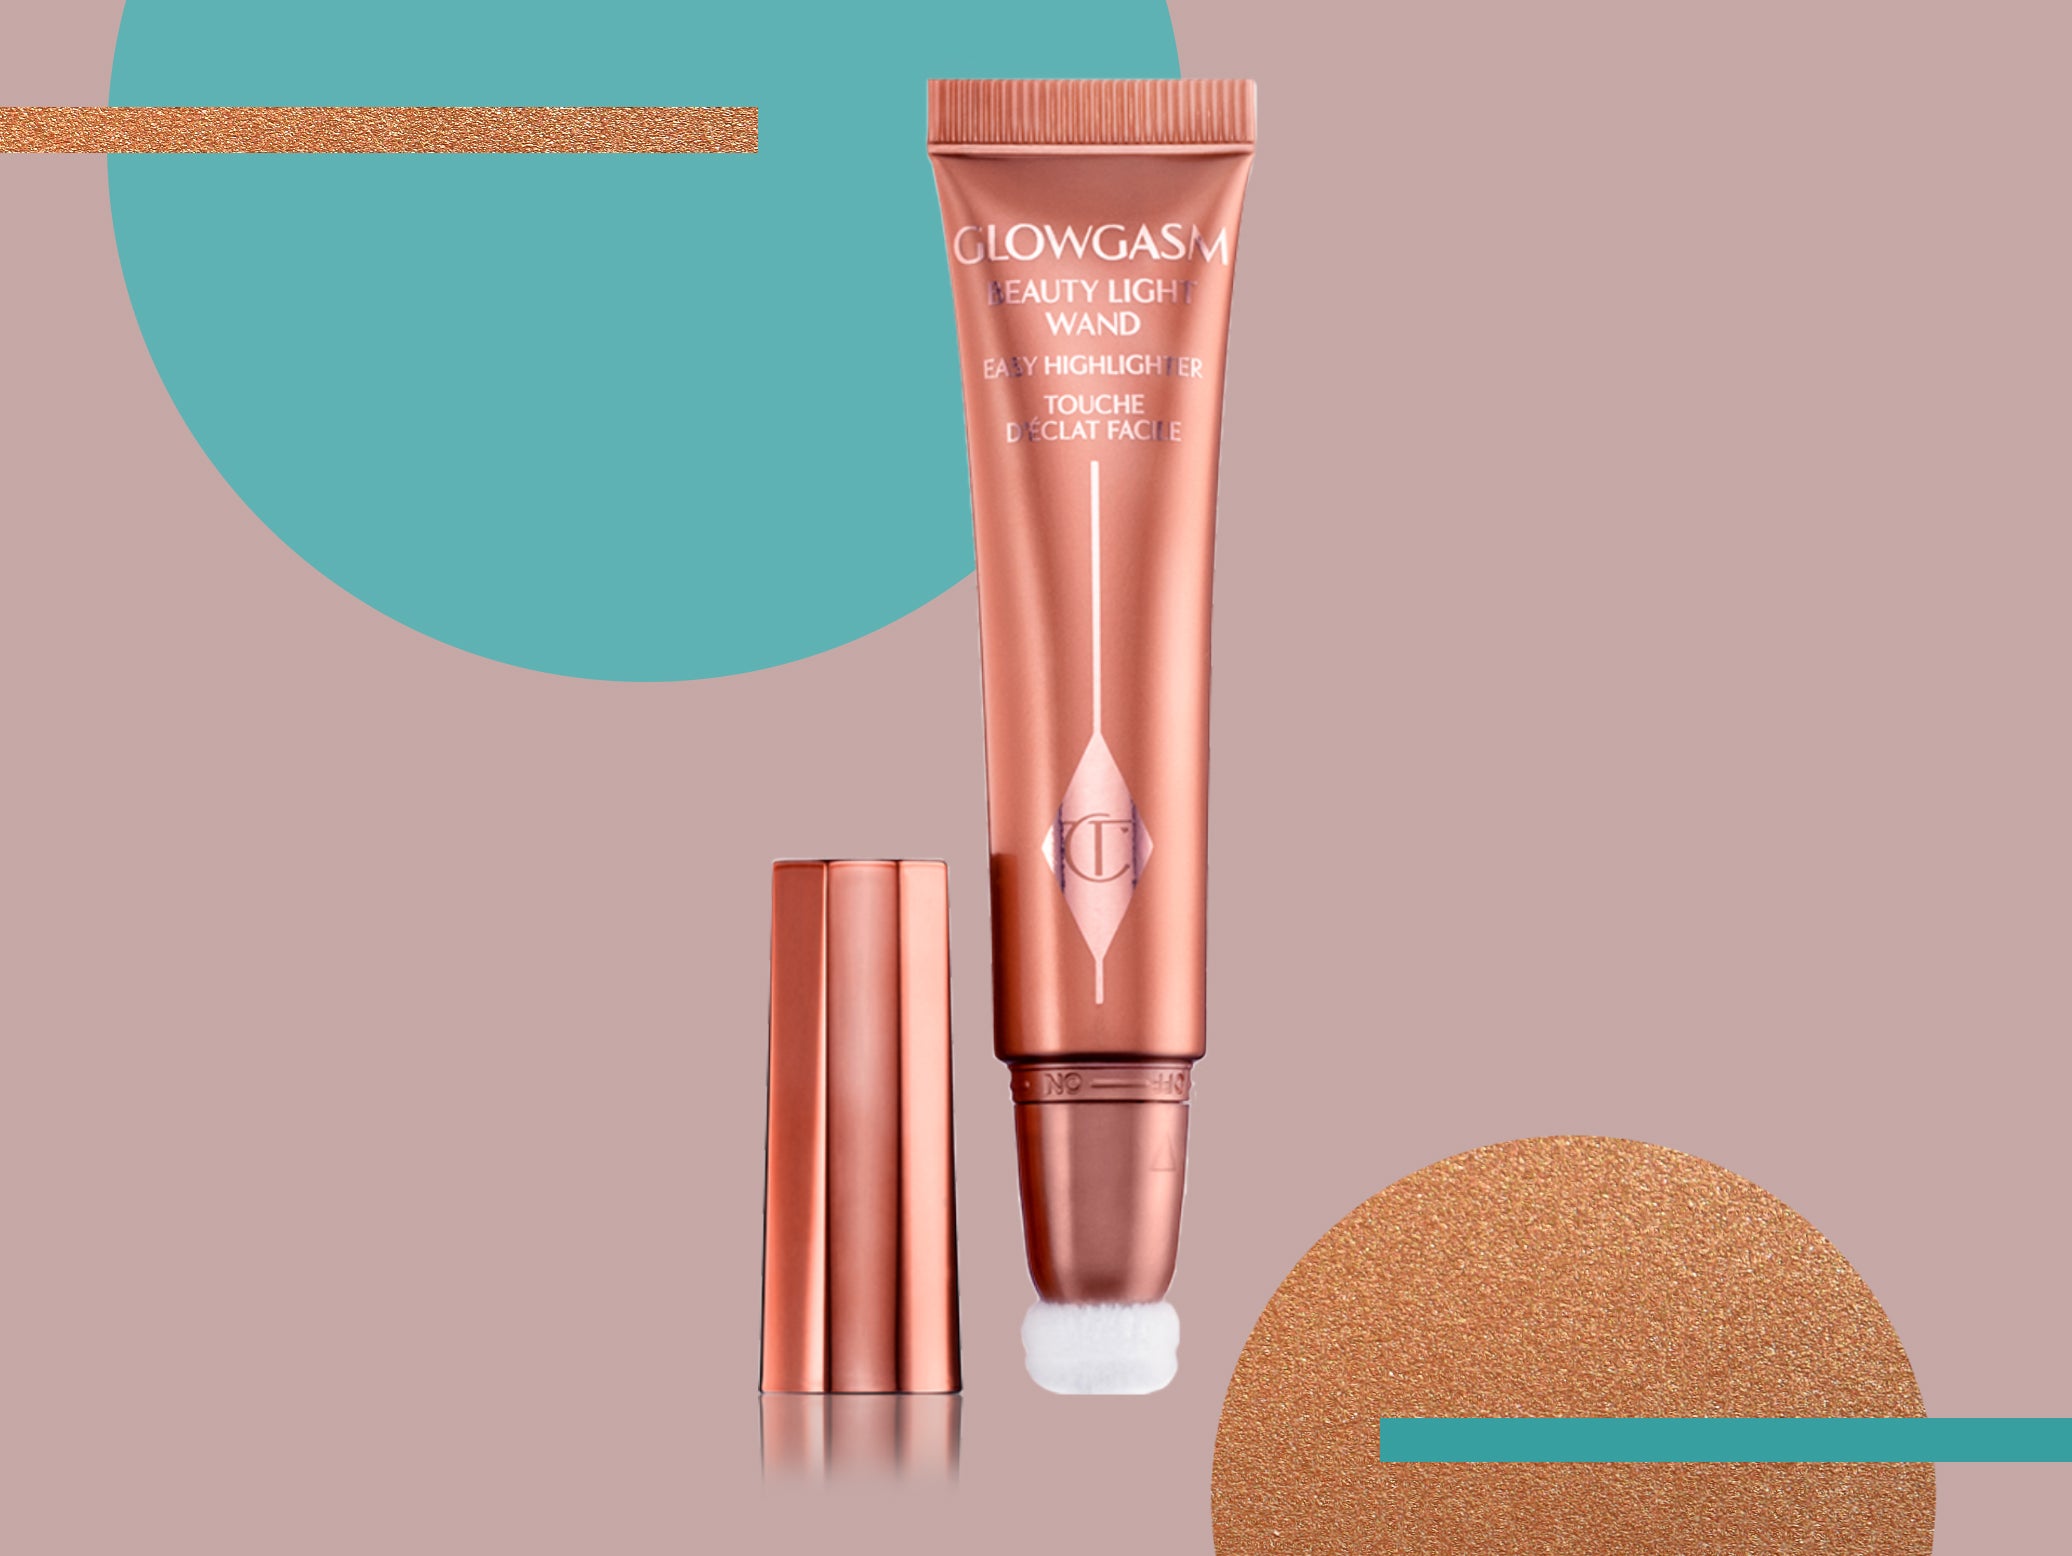 Charlotte Tilbury has restocked its sell-out pinkgasm beauty light wand – here’s how to get yours